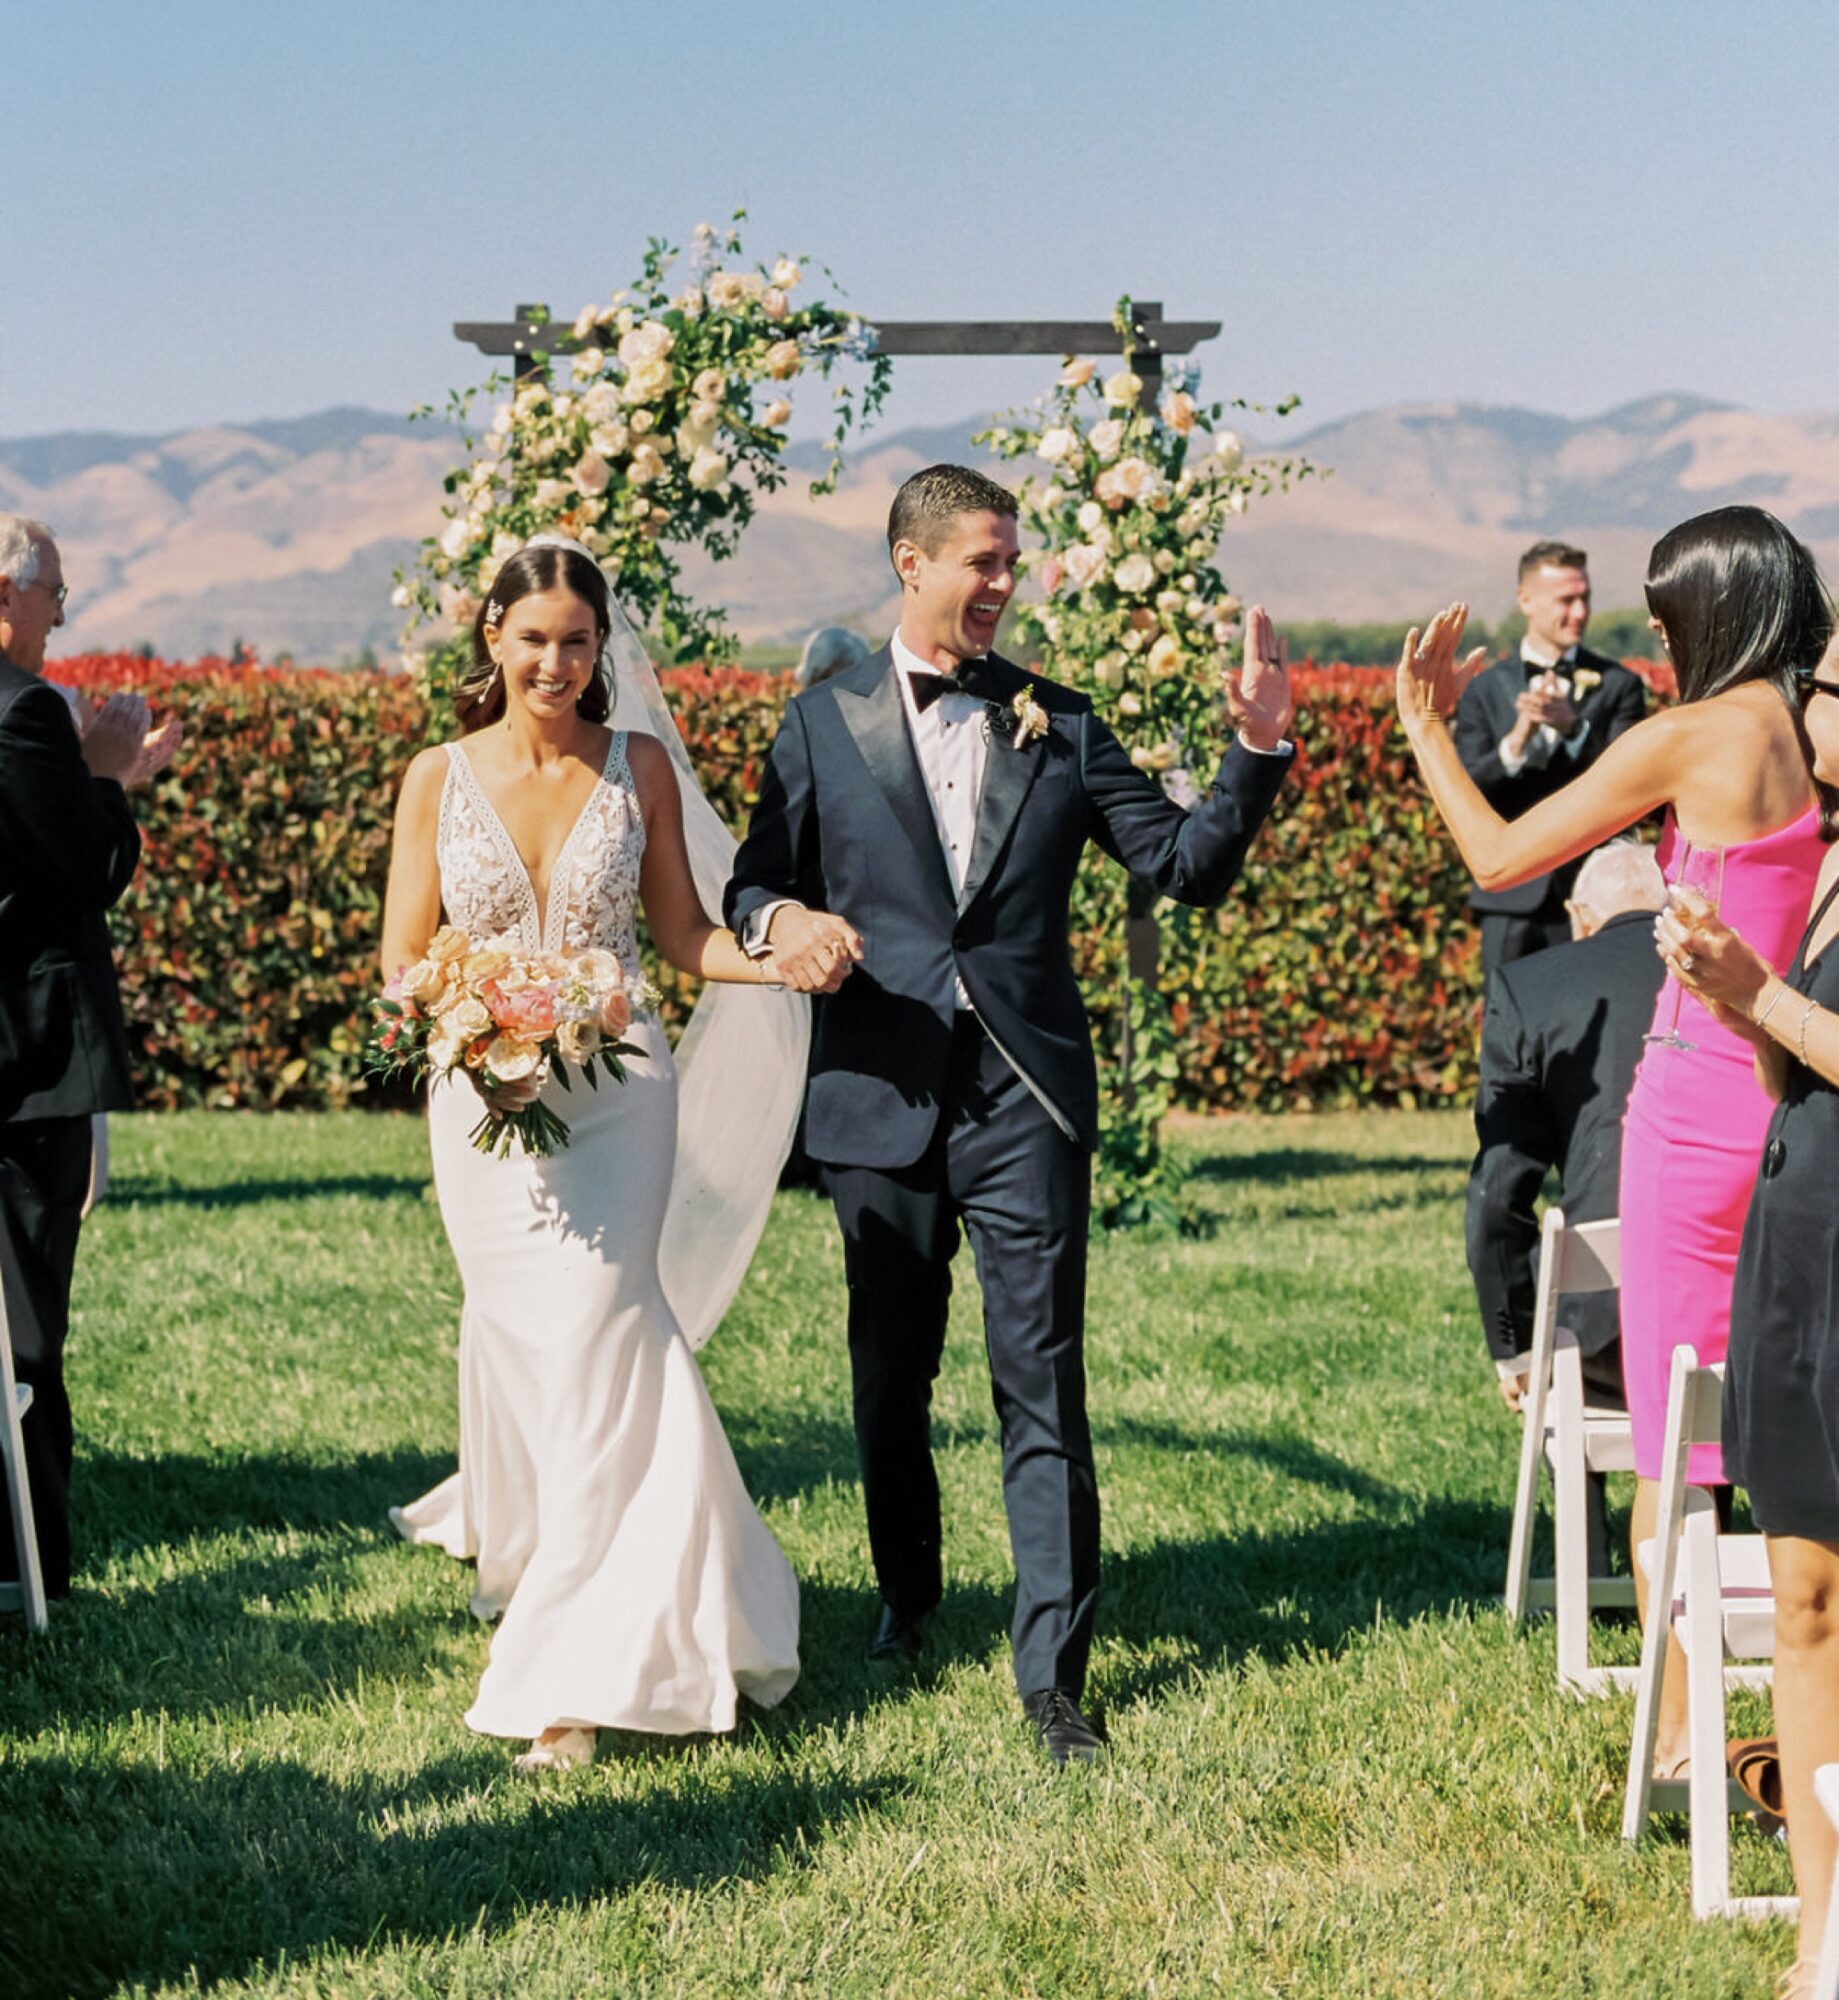 Ceremony with a view of the hills, florals by Elegant Details with Elyse Events at the White Barn Edna Valley photographed by san luis obispo wedding photographers jessica sofranko